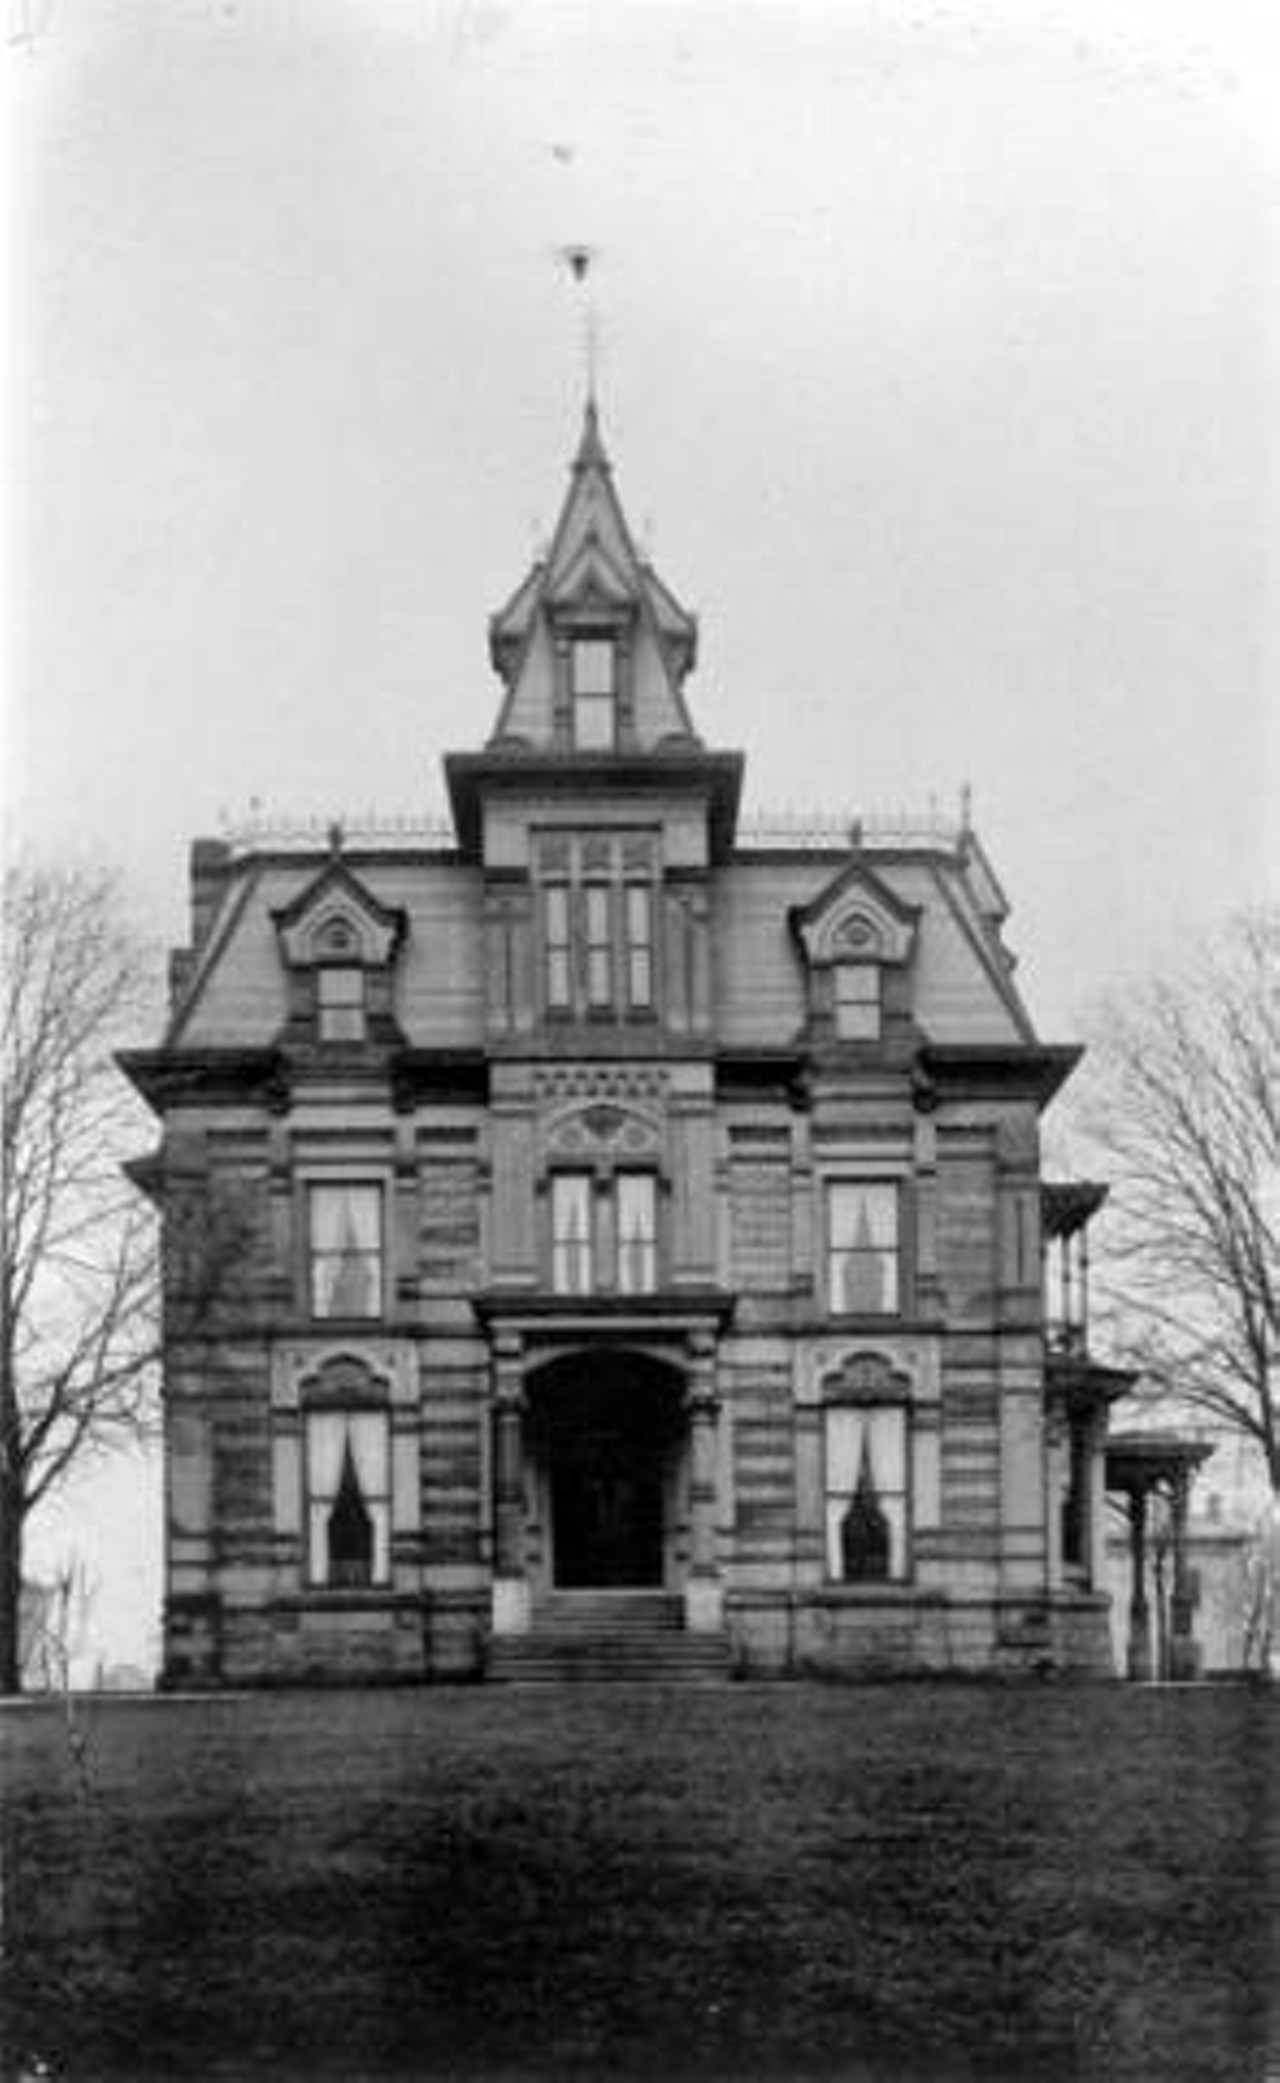 Mansion of Daniel P. Eells, once part of Millionaires' Row on Euclid Avenue in Cleveland, Ohio. c. 1900